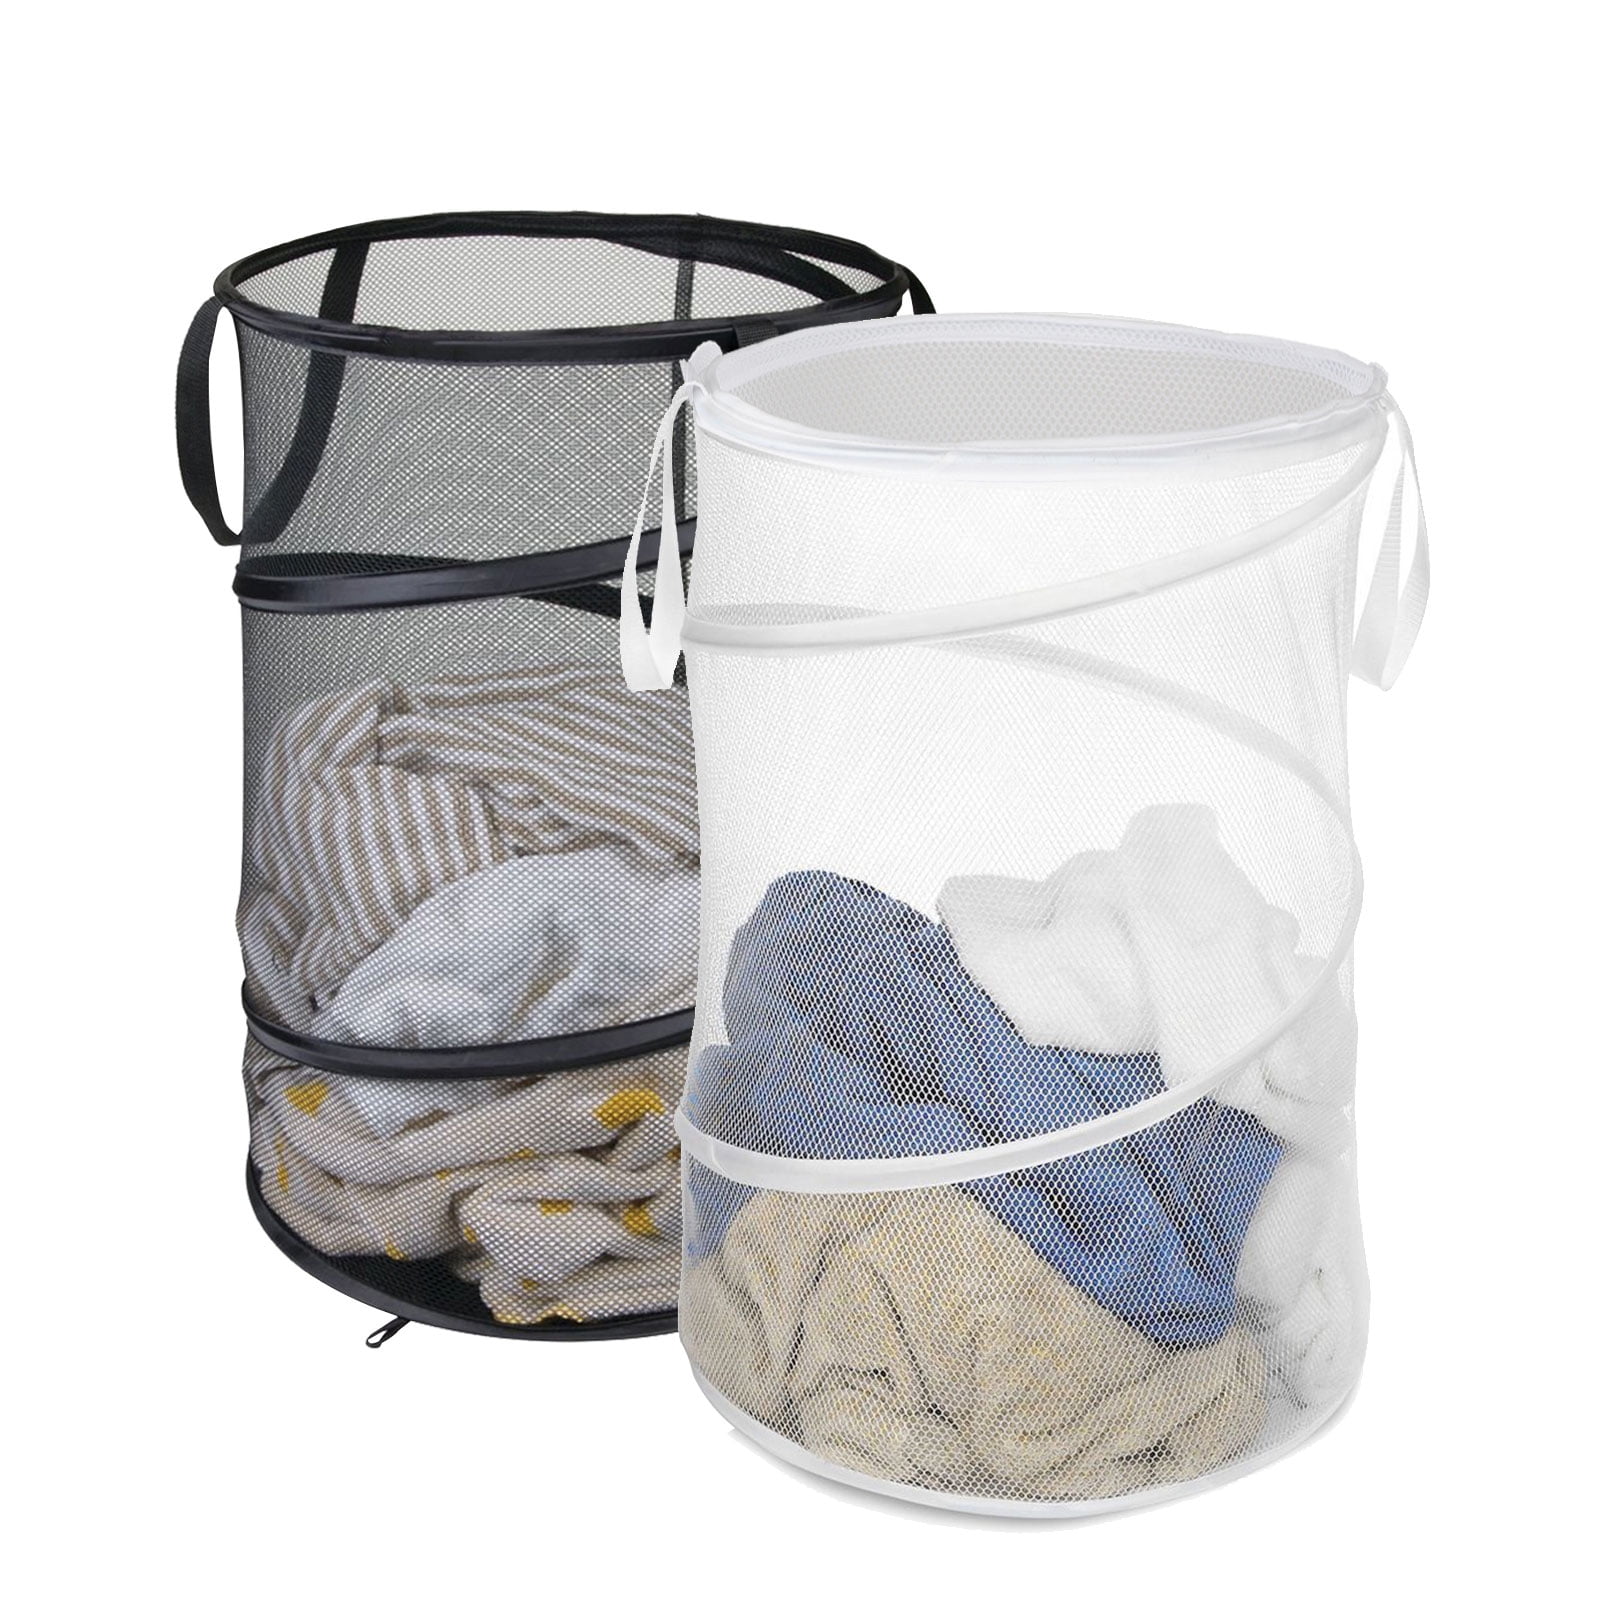 Anjing Large Pop-Up Laundry Hampers Drawstring Waterproof Round Cotton Linen Collapsible Storage Basket